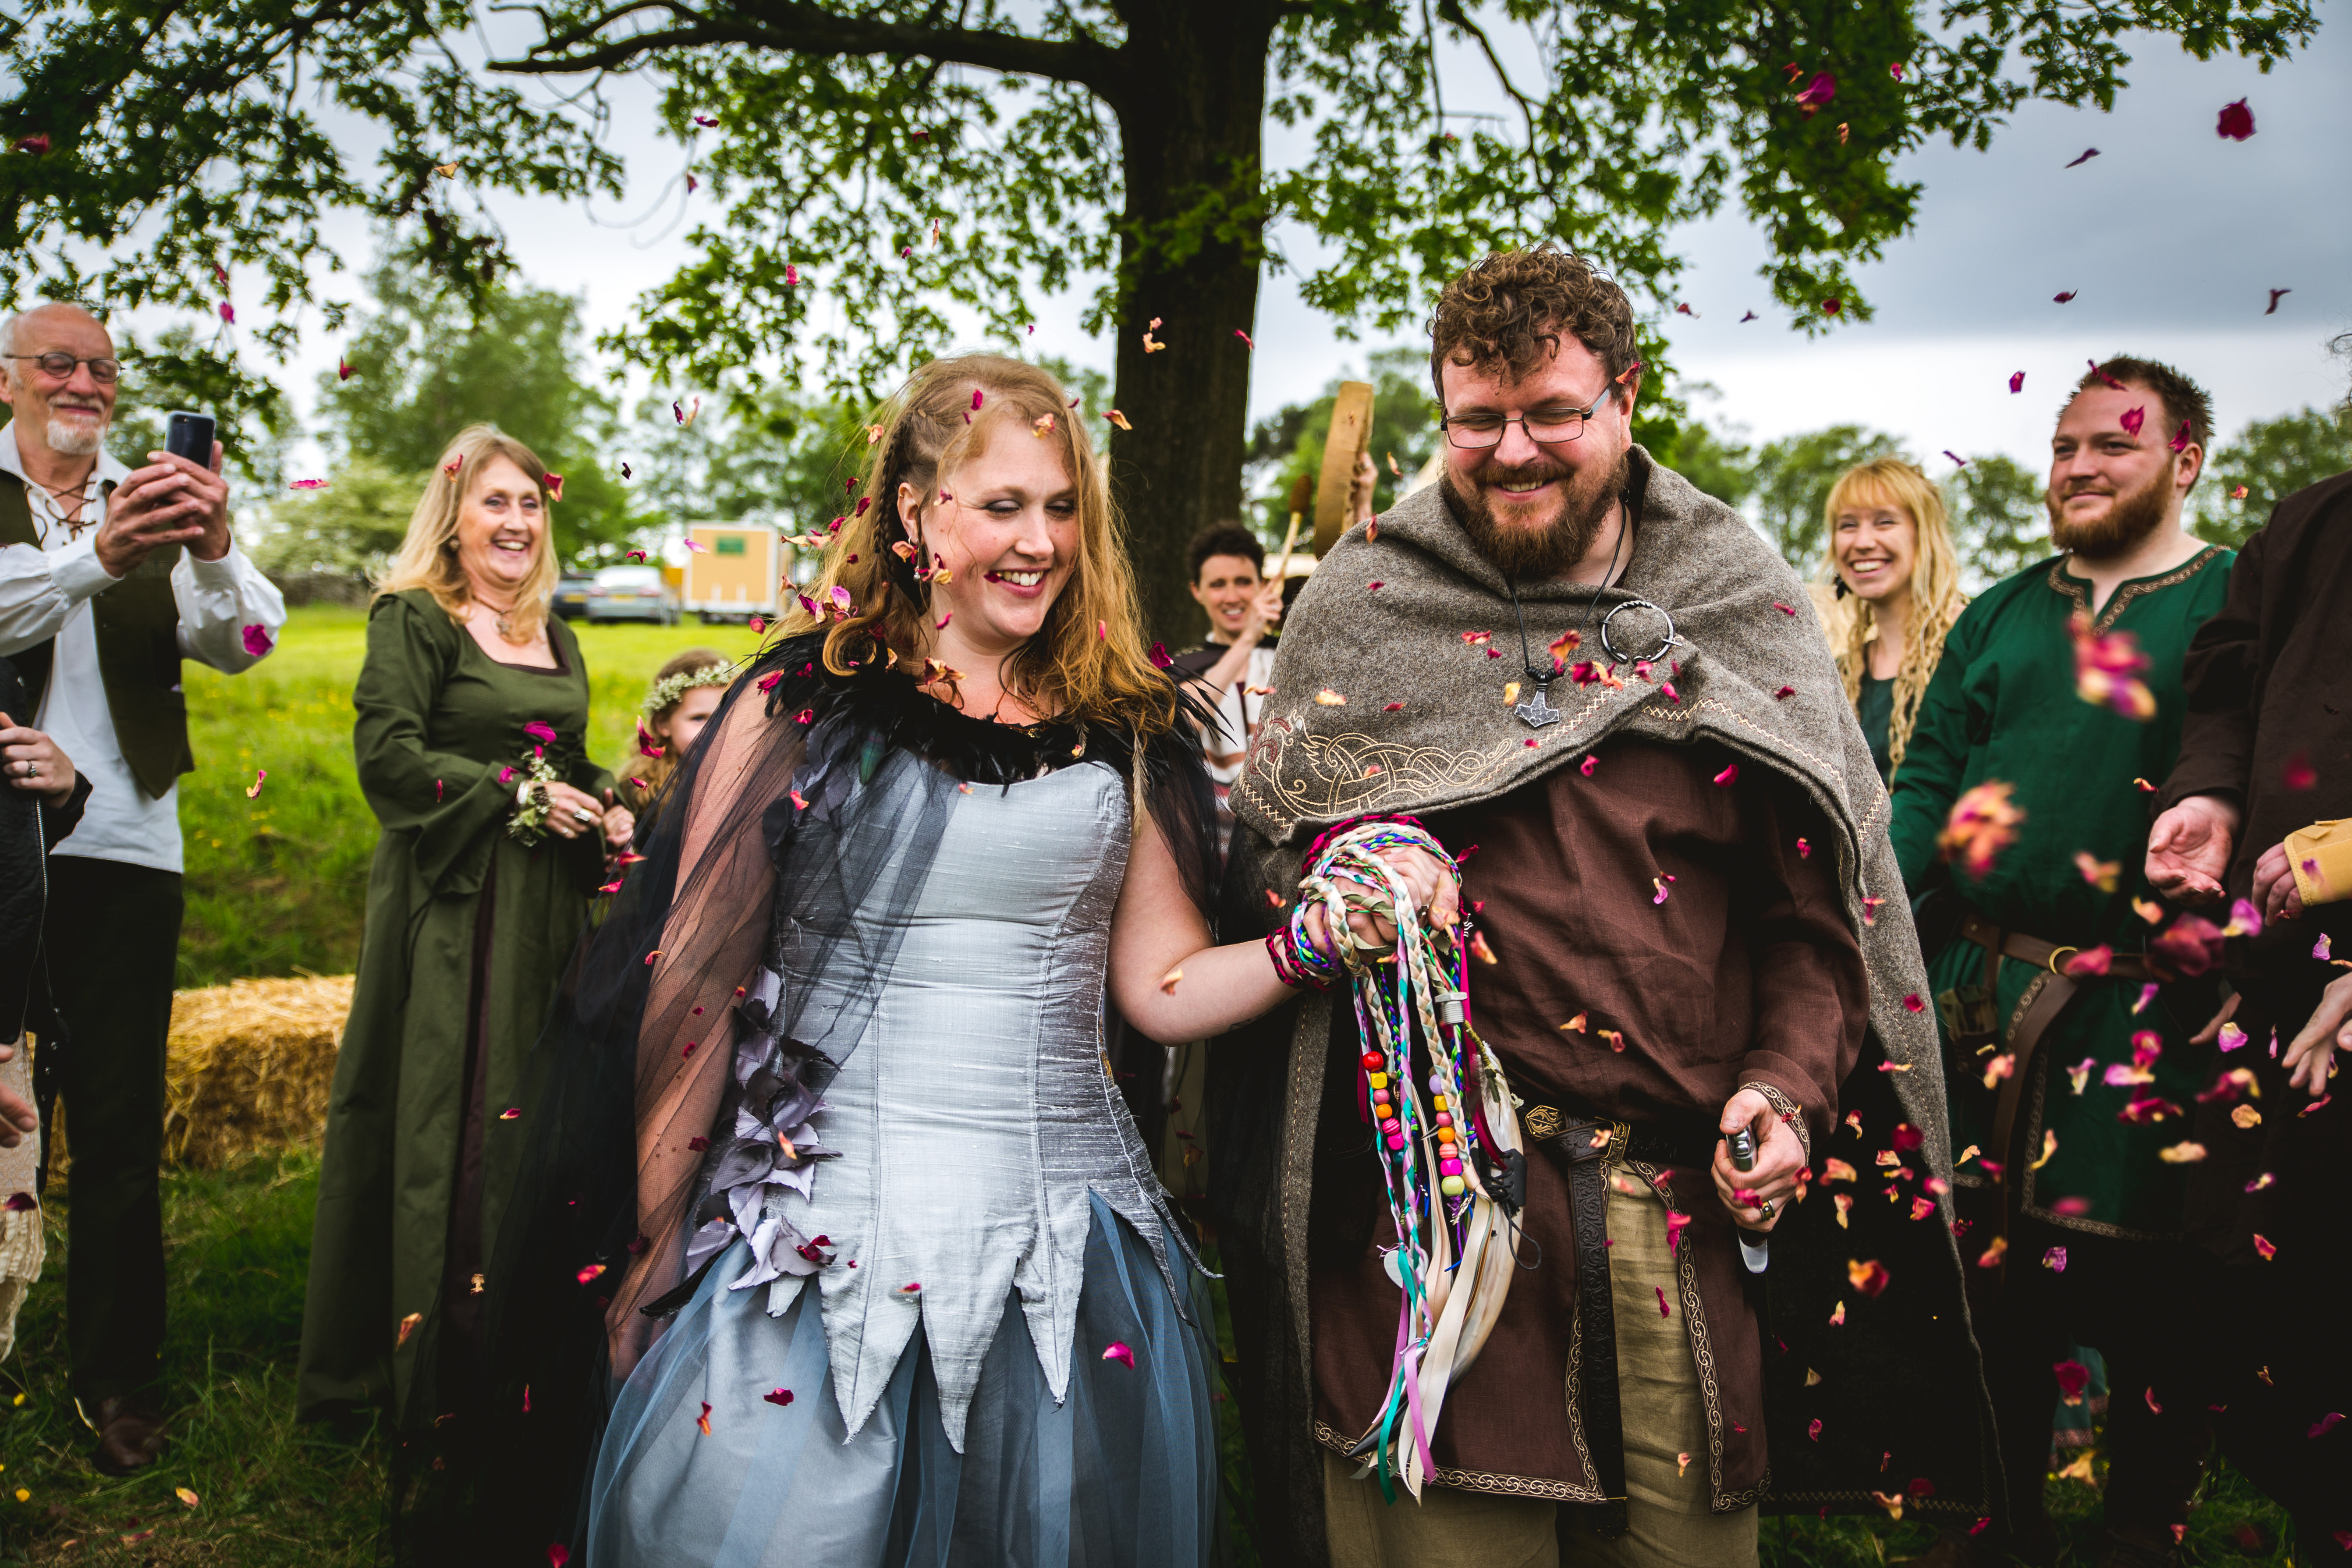 a viking bride and groom walk through their guests who throw confetti. theire hands are tied with handfasting cords and their Celebrant Keli Tomlin drums in the background to signal the end of their outdoor wedding ceremony